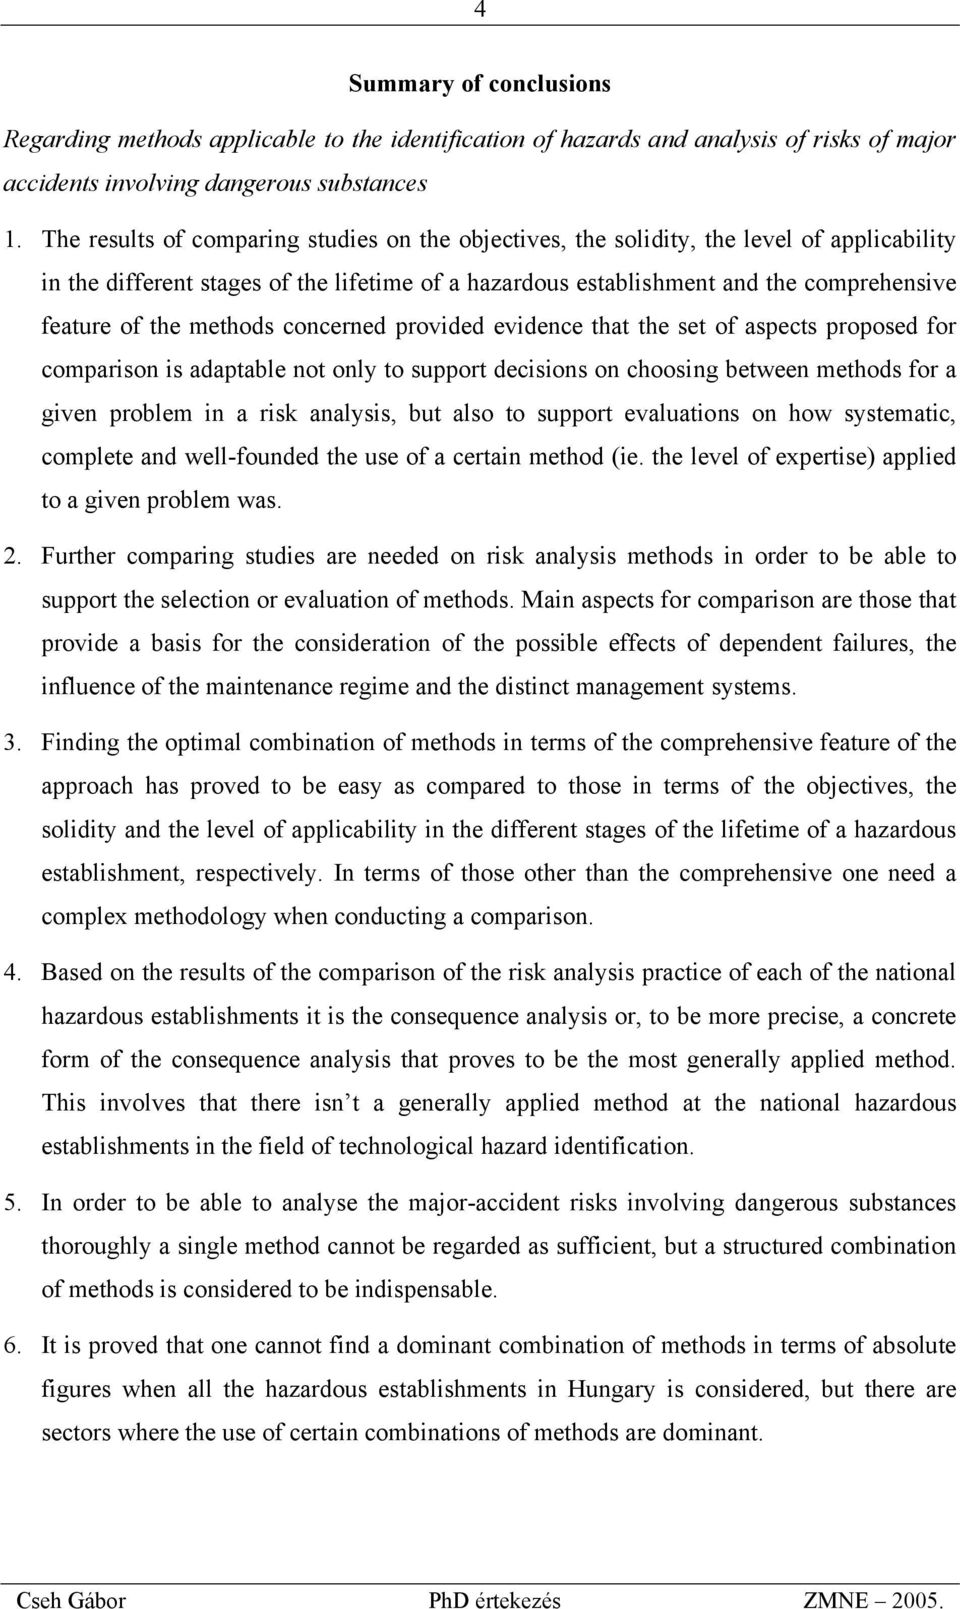 methods concerned provided evidence that the set of aspects proposed for comparison is adaptable not only to support decisions on choosing between methods for a given problem in a risk analysis, but